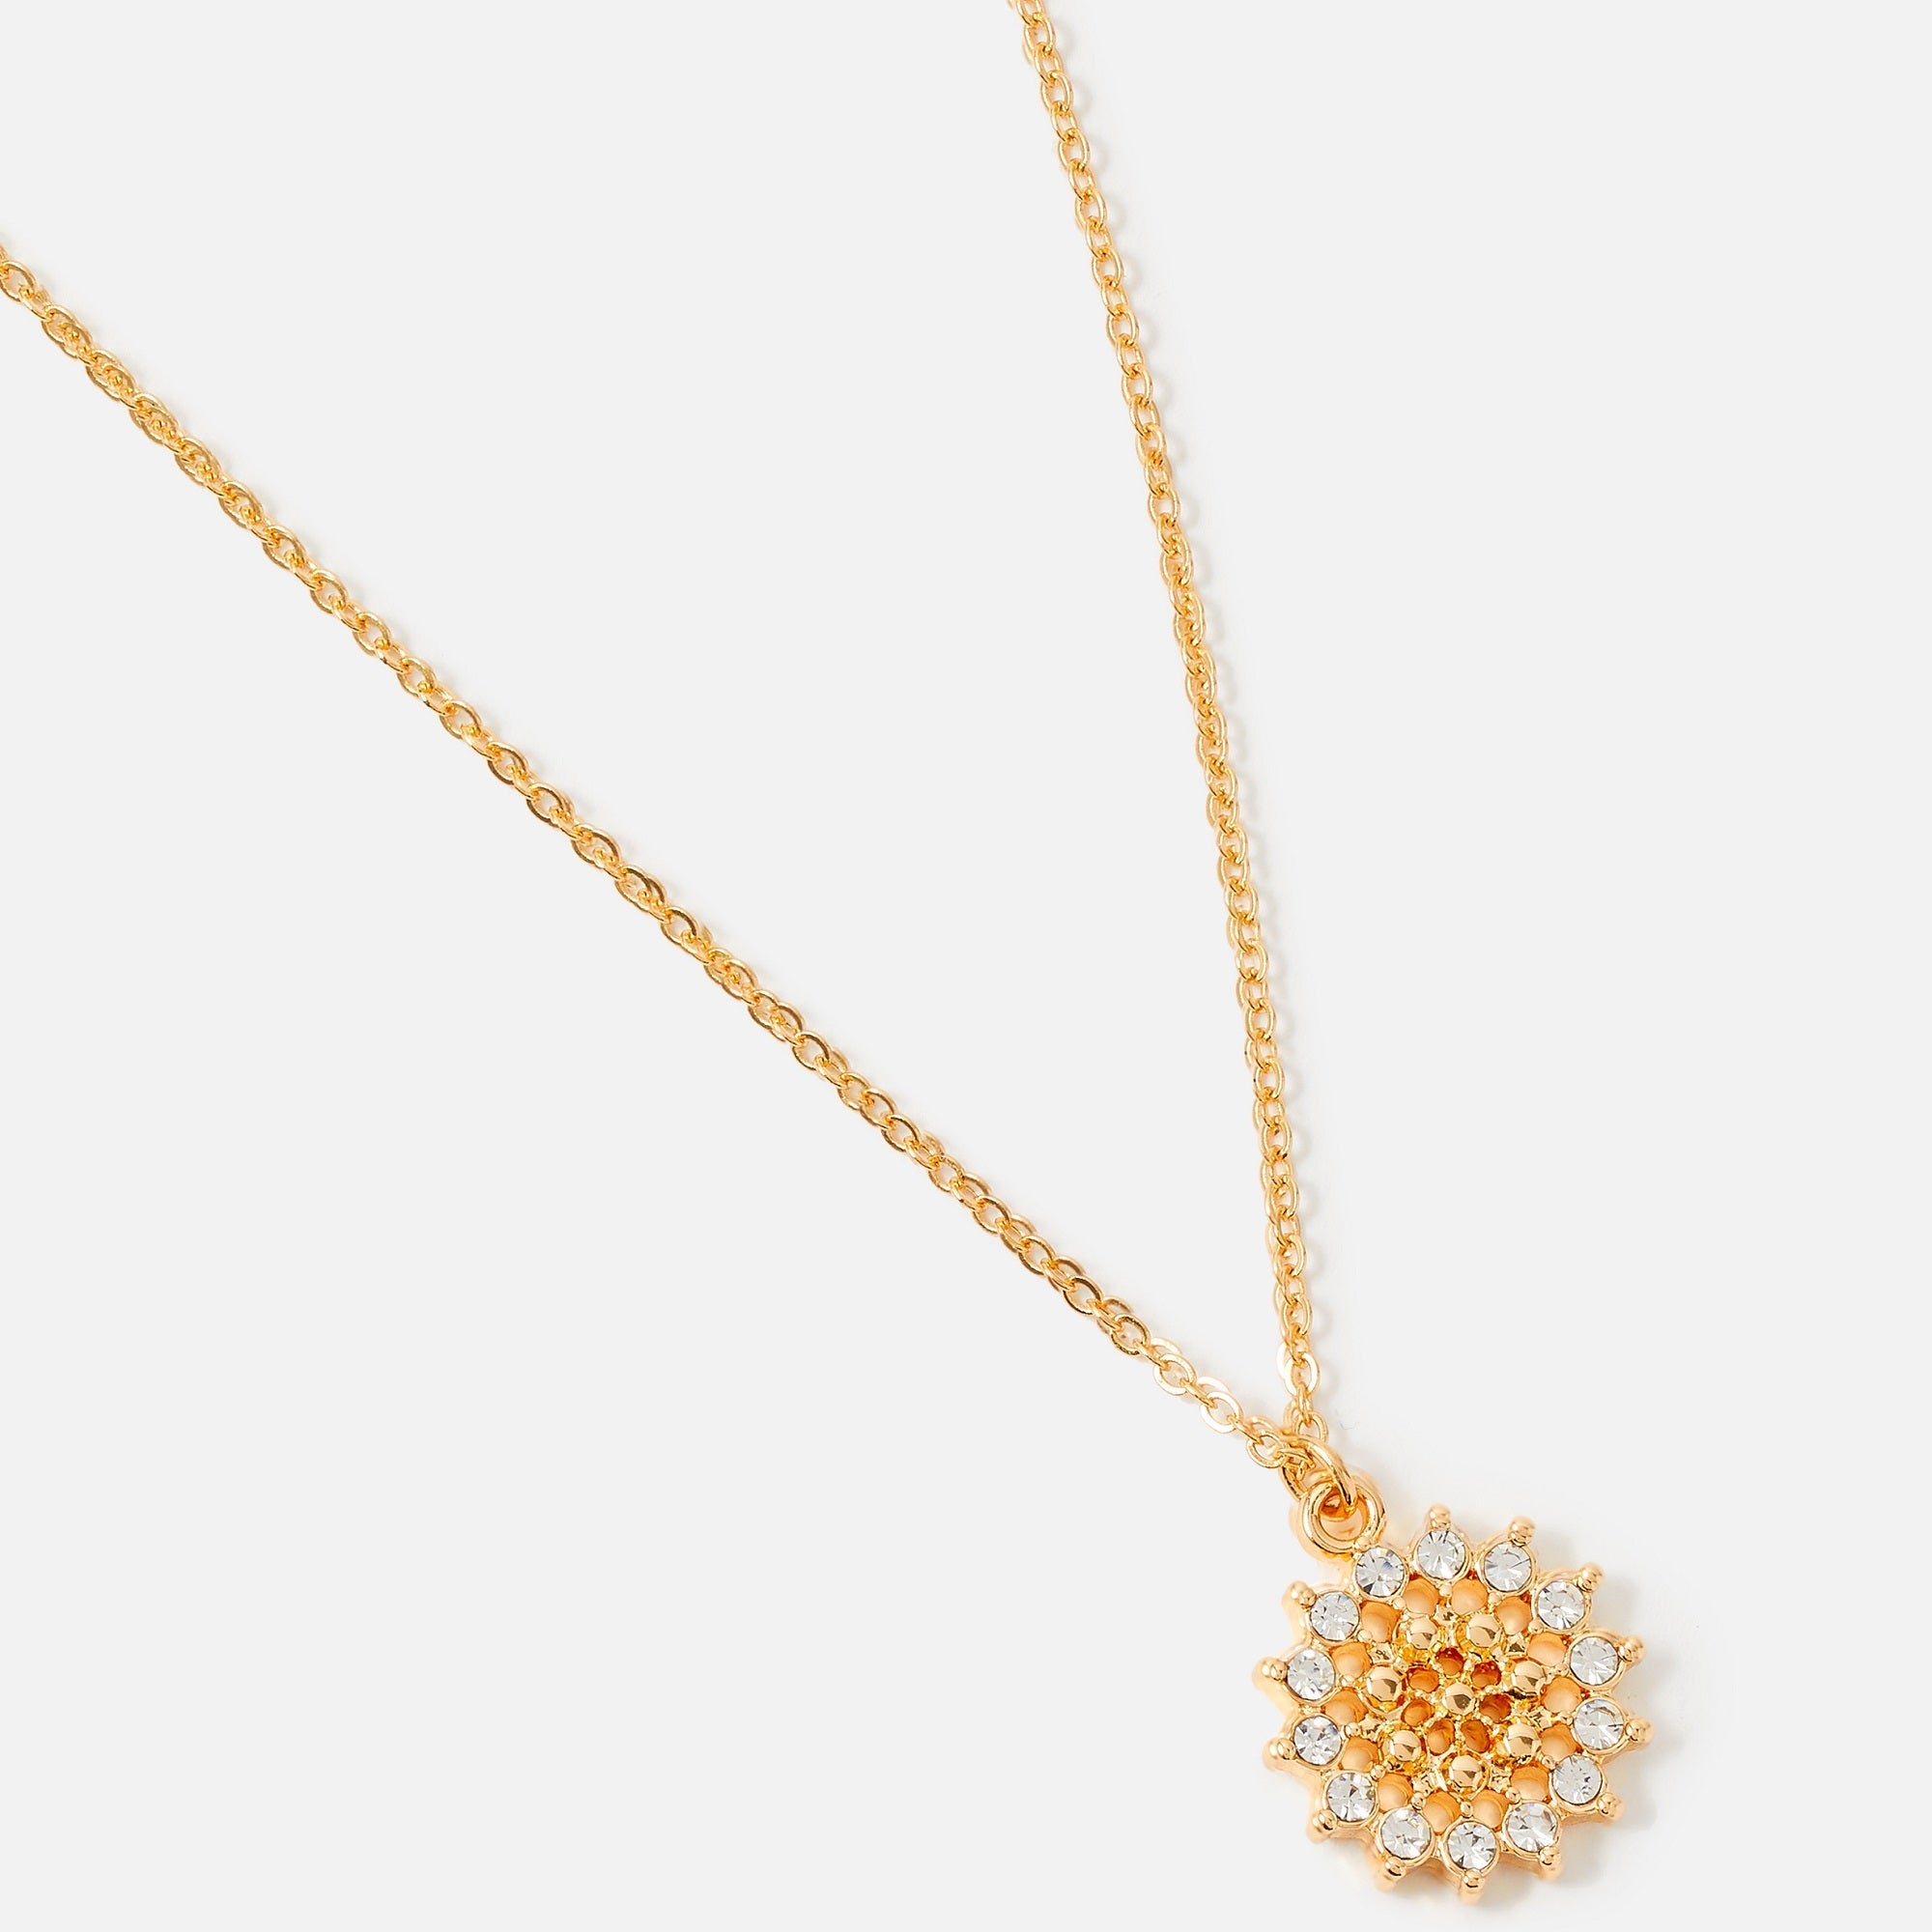 Cube Diamante Mini Pendant Gold-toned Dainty Necklace, सोना चढ़ा हार -  Ayesha Fashion Private Limited | ID: 26313558497